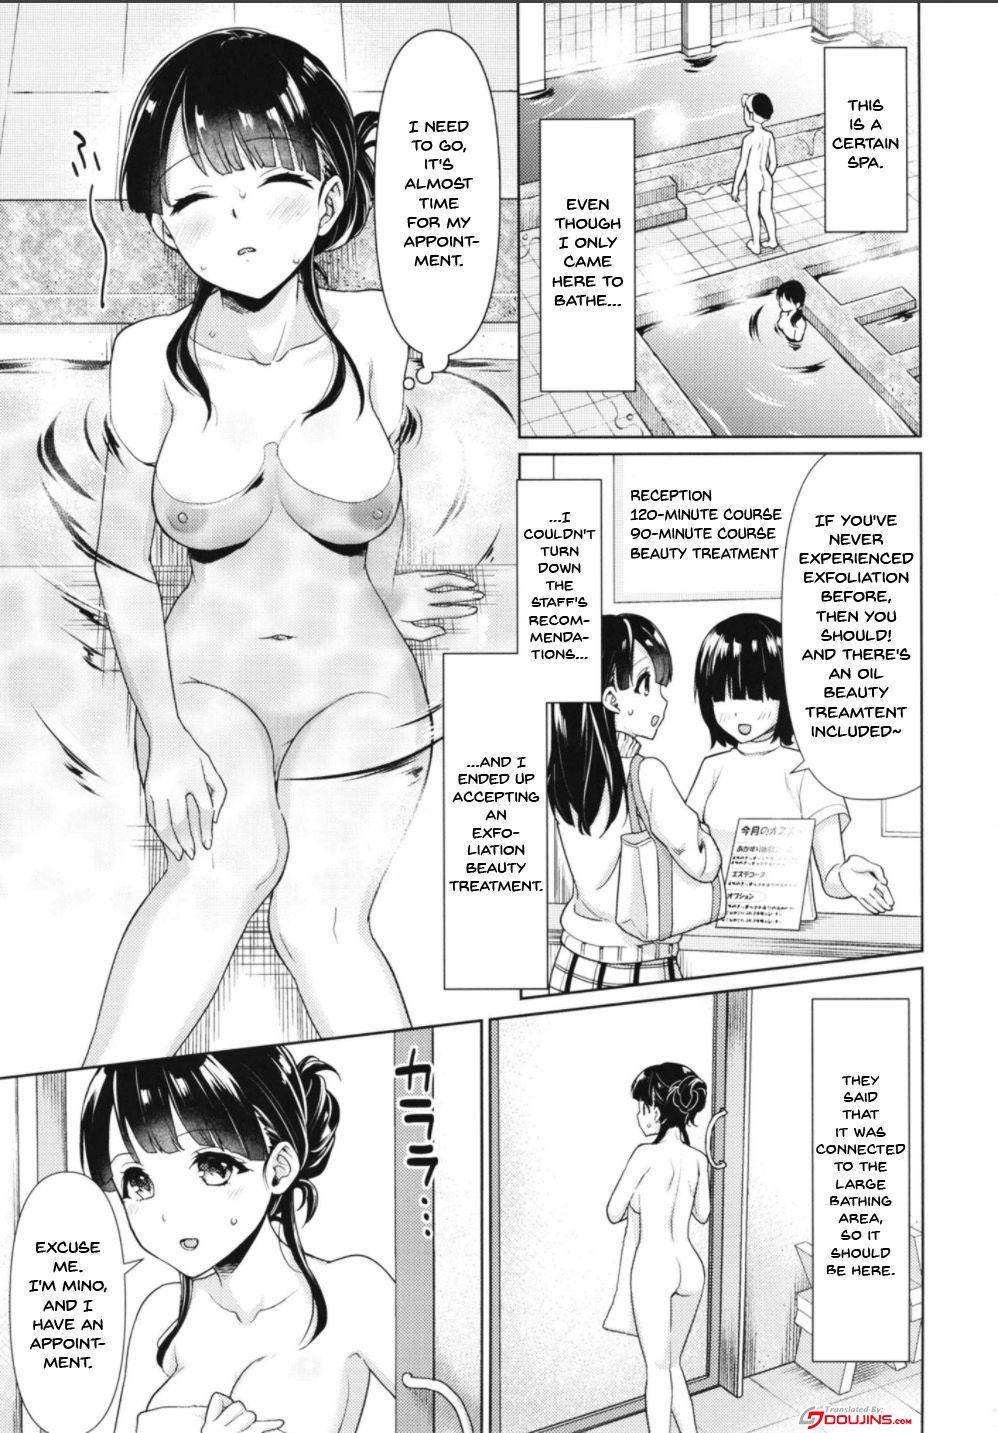 Cock - A Lewd Beauty Treatment This Plain Girl Couldnt Say No To Russia - Page 2